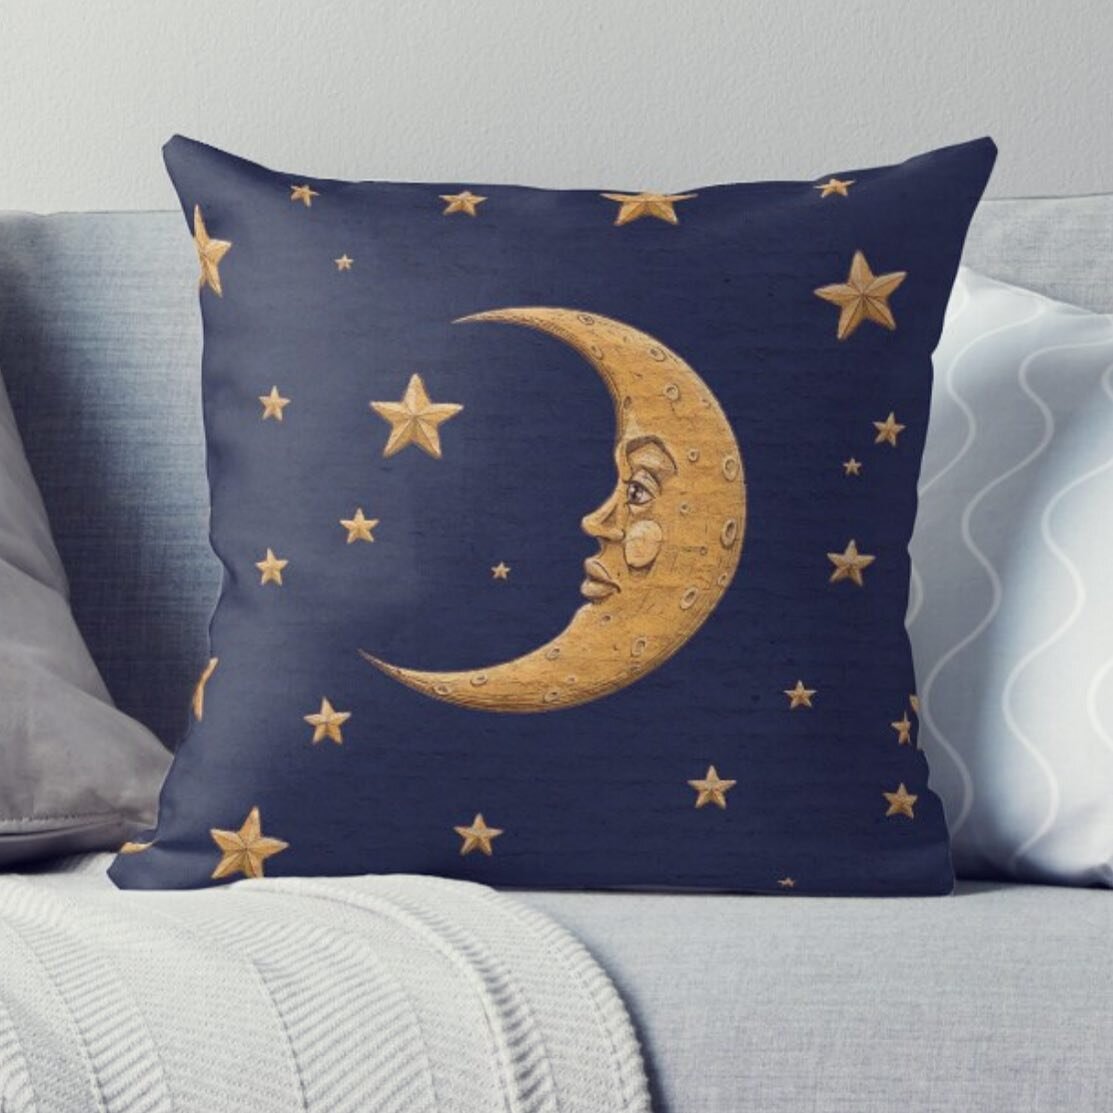 Sold quite a few of my vintage gold moon and stars throw pillows on my #redbubble profile today! Link in bio if you want one for yourself or to see the pattern on over 50 different types of products! 🌙 ⭐️ #independentartist #vintagestyle #vintagehom